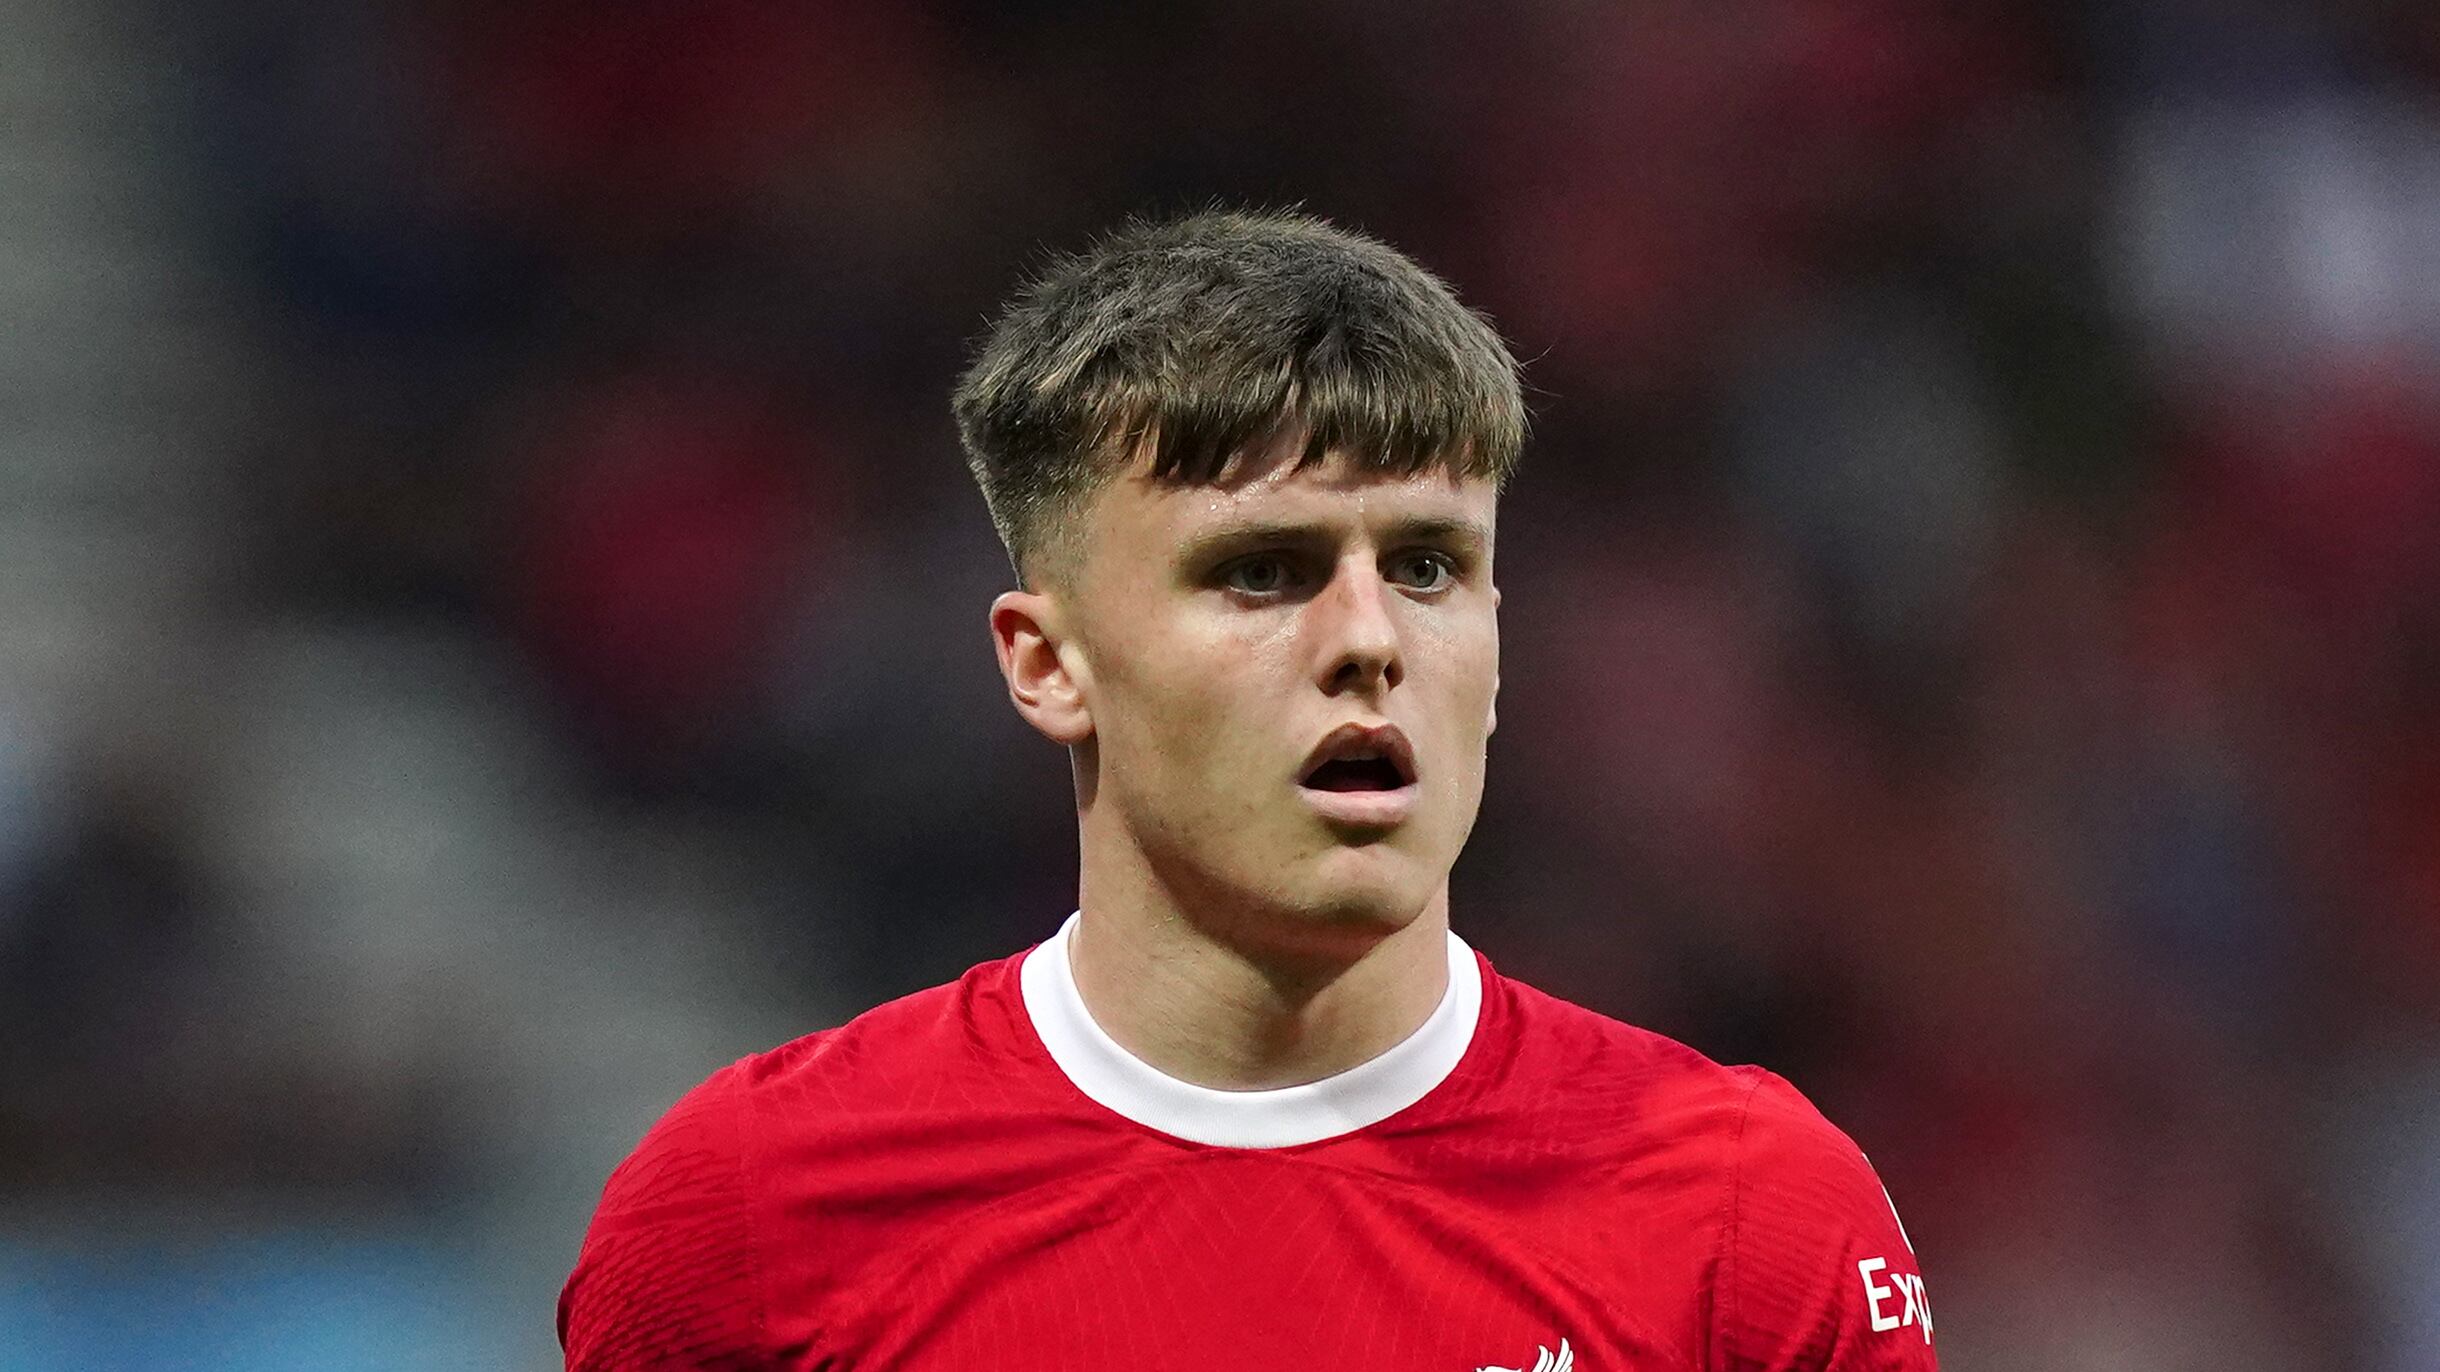 Liverpool’s Ben Doak called up to Steve Clarke’s Euro squad